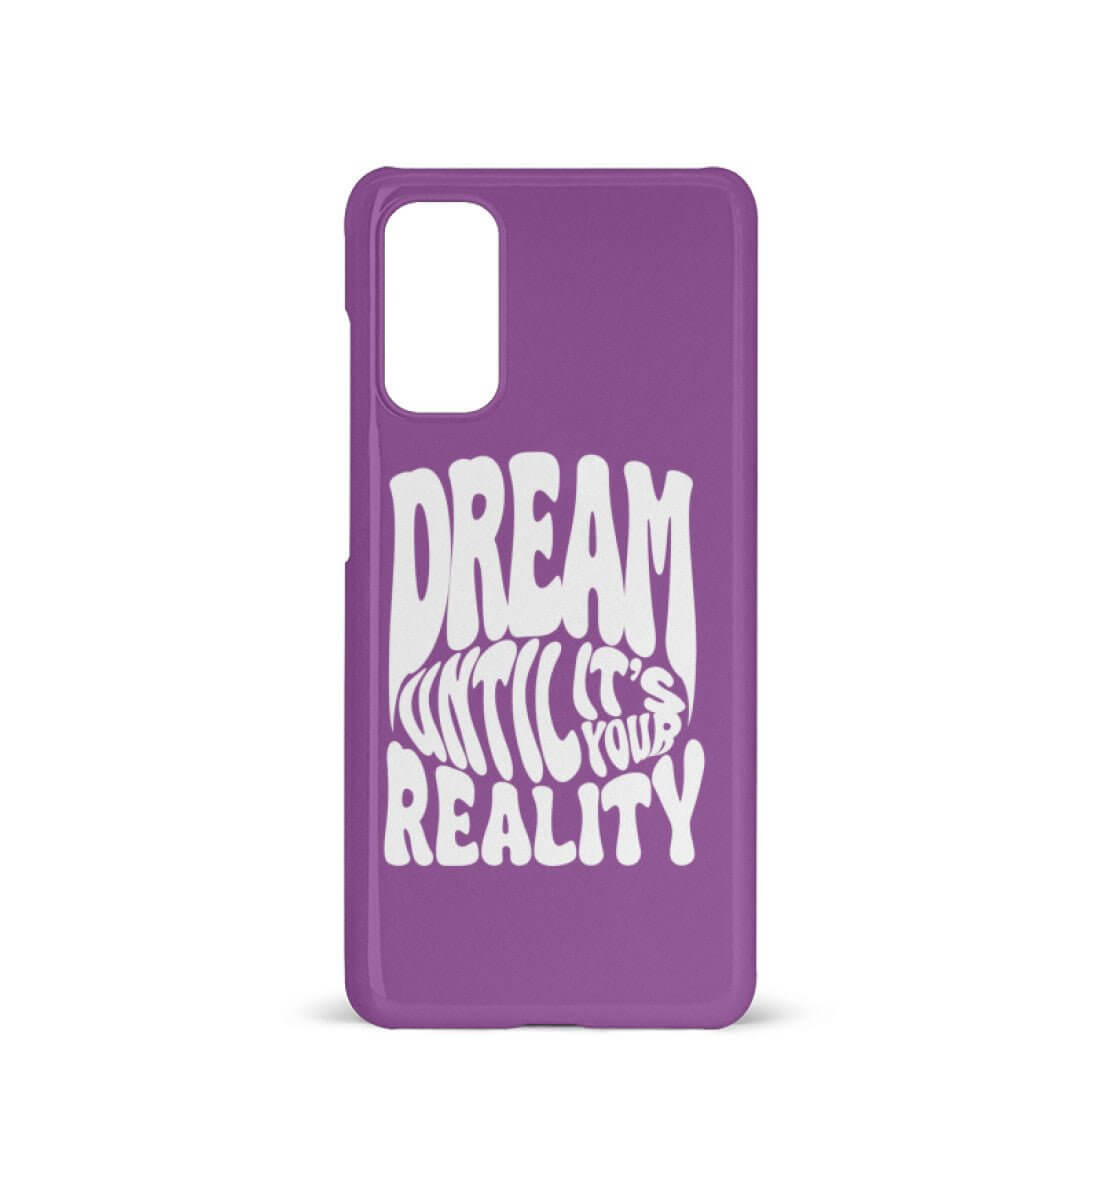 'DREAM UNTIL IT'S YOUR REALITY' - Samsung Galaxy S20 Handyhülle - GODVIBES